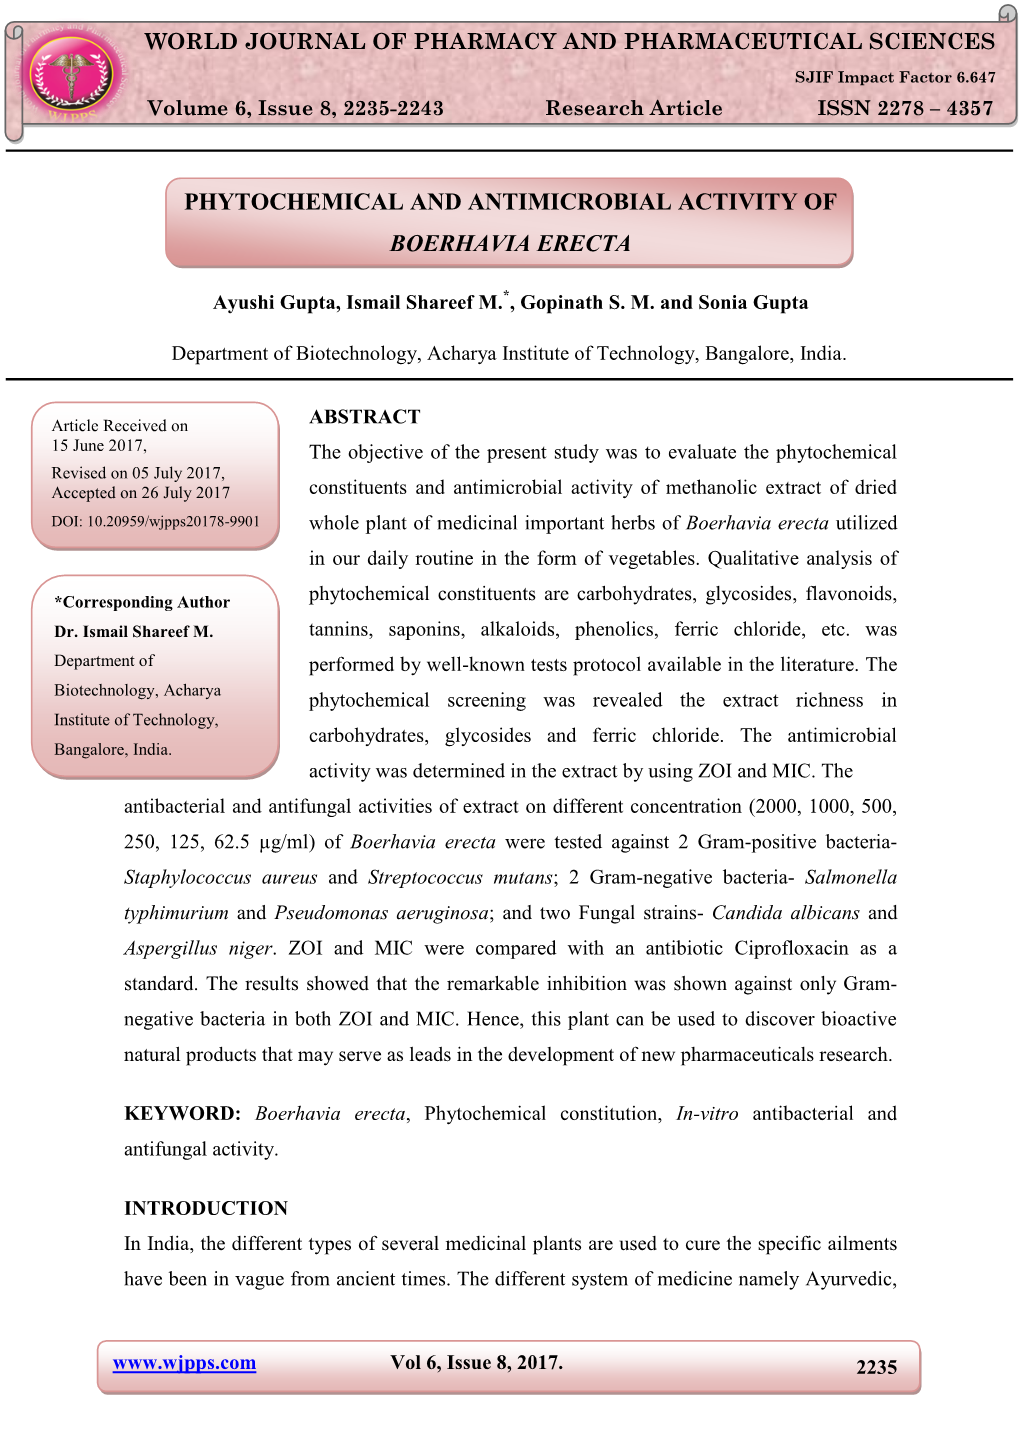 Phytochemical and Antimicrobial Activity of Boerhavia Erecta